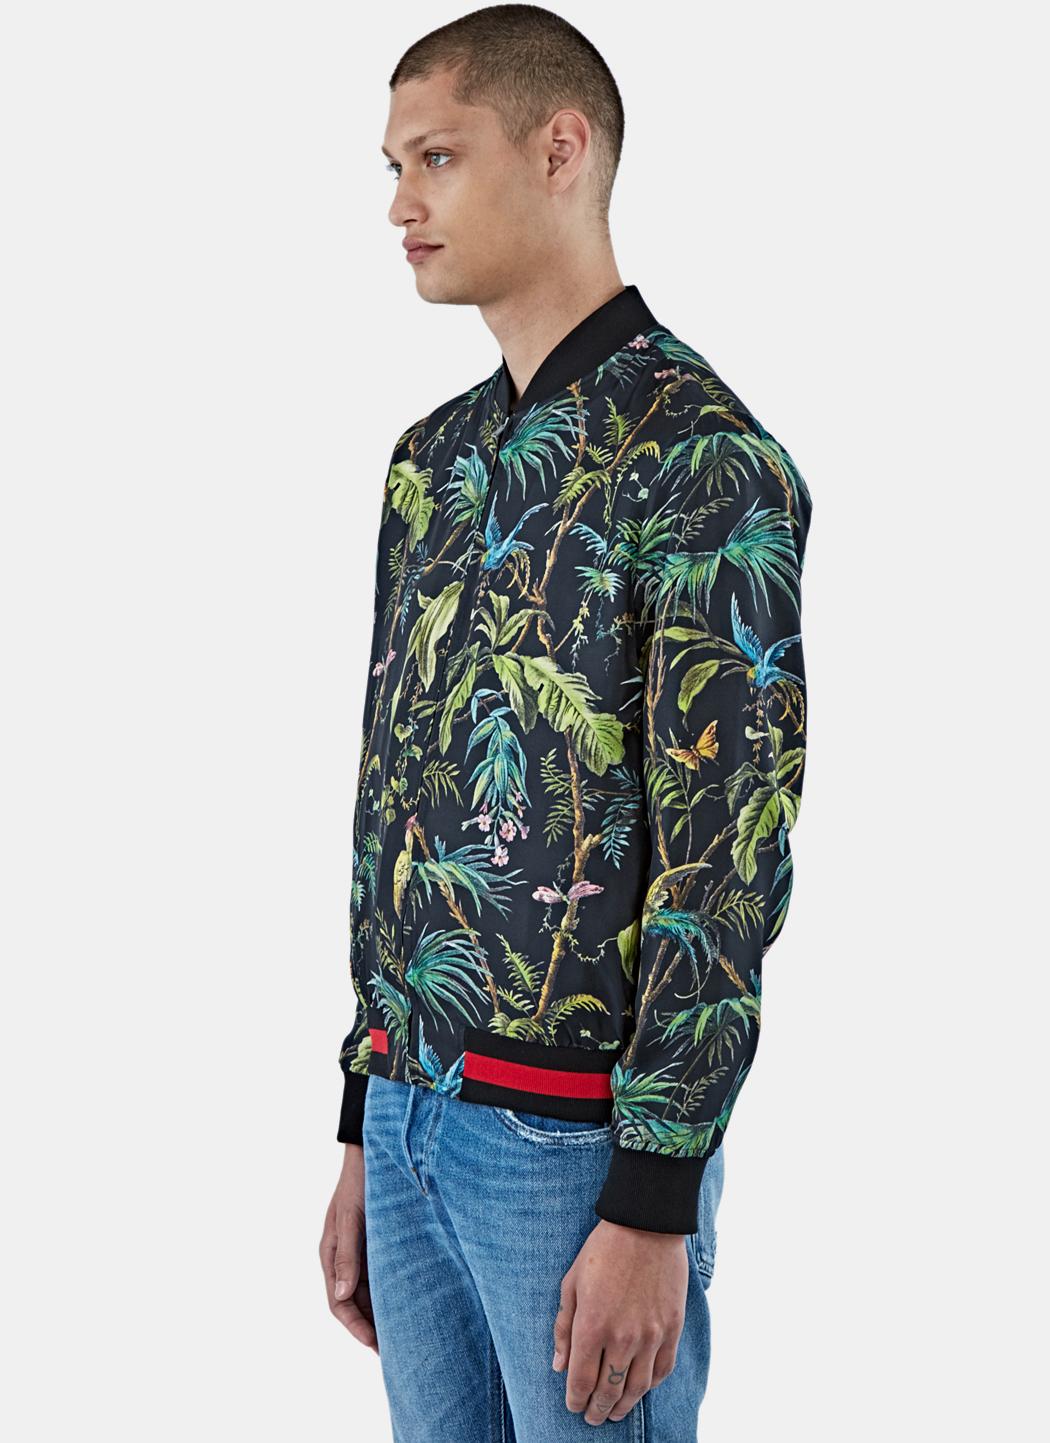 Lyst - Gucci Men's Satin Tropical Print Bomber Jacket In Black And ...